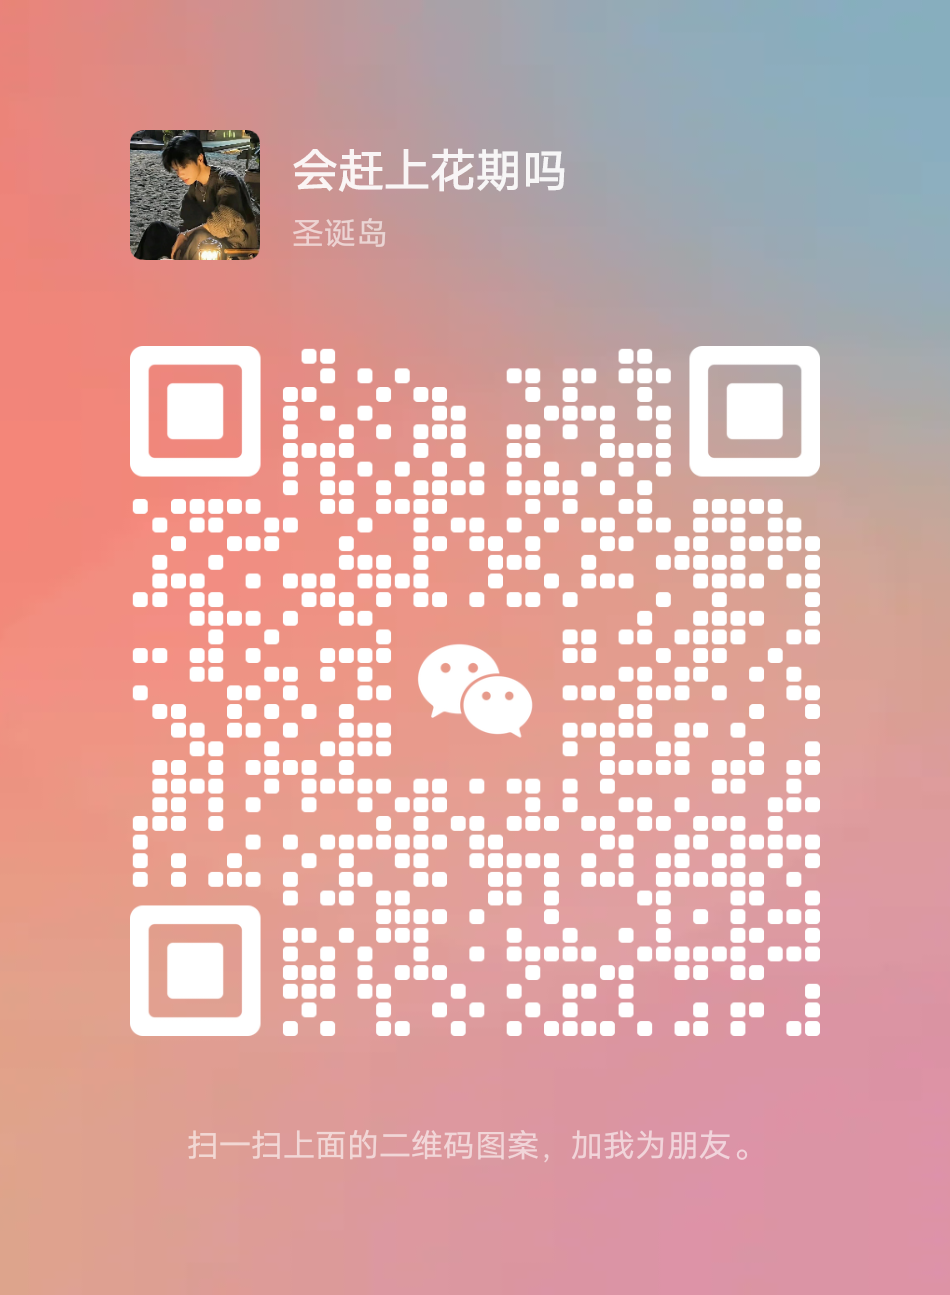 mmqrcode1712376442390.png